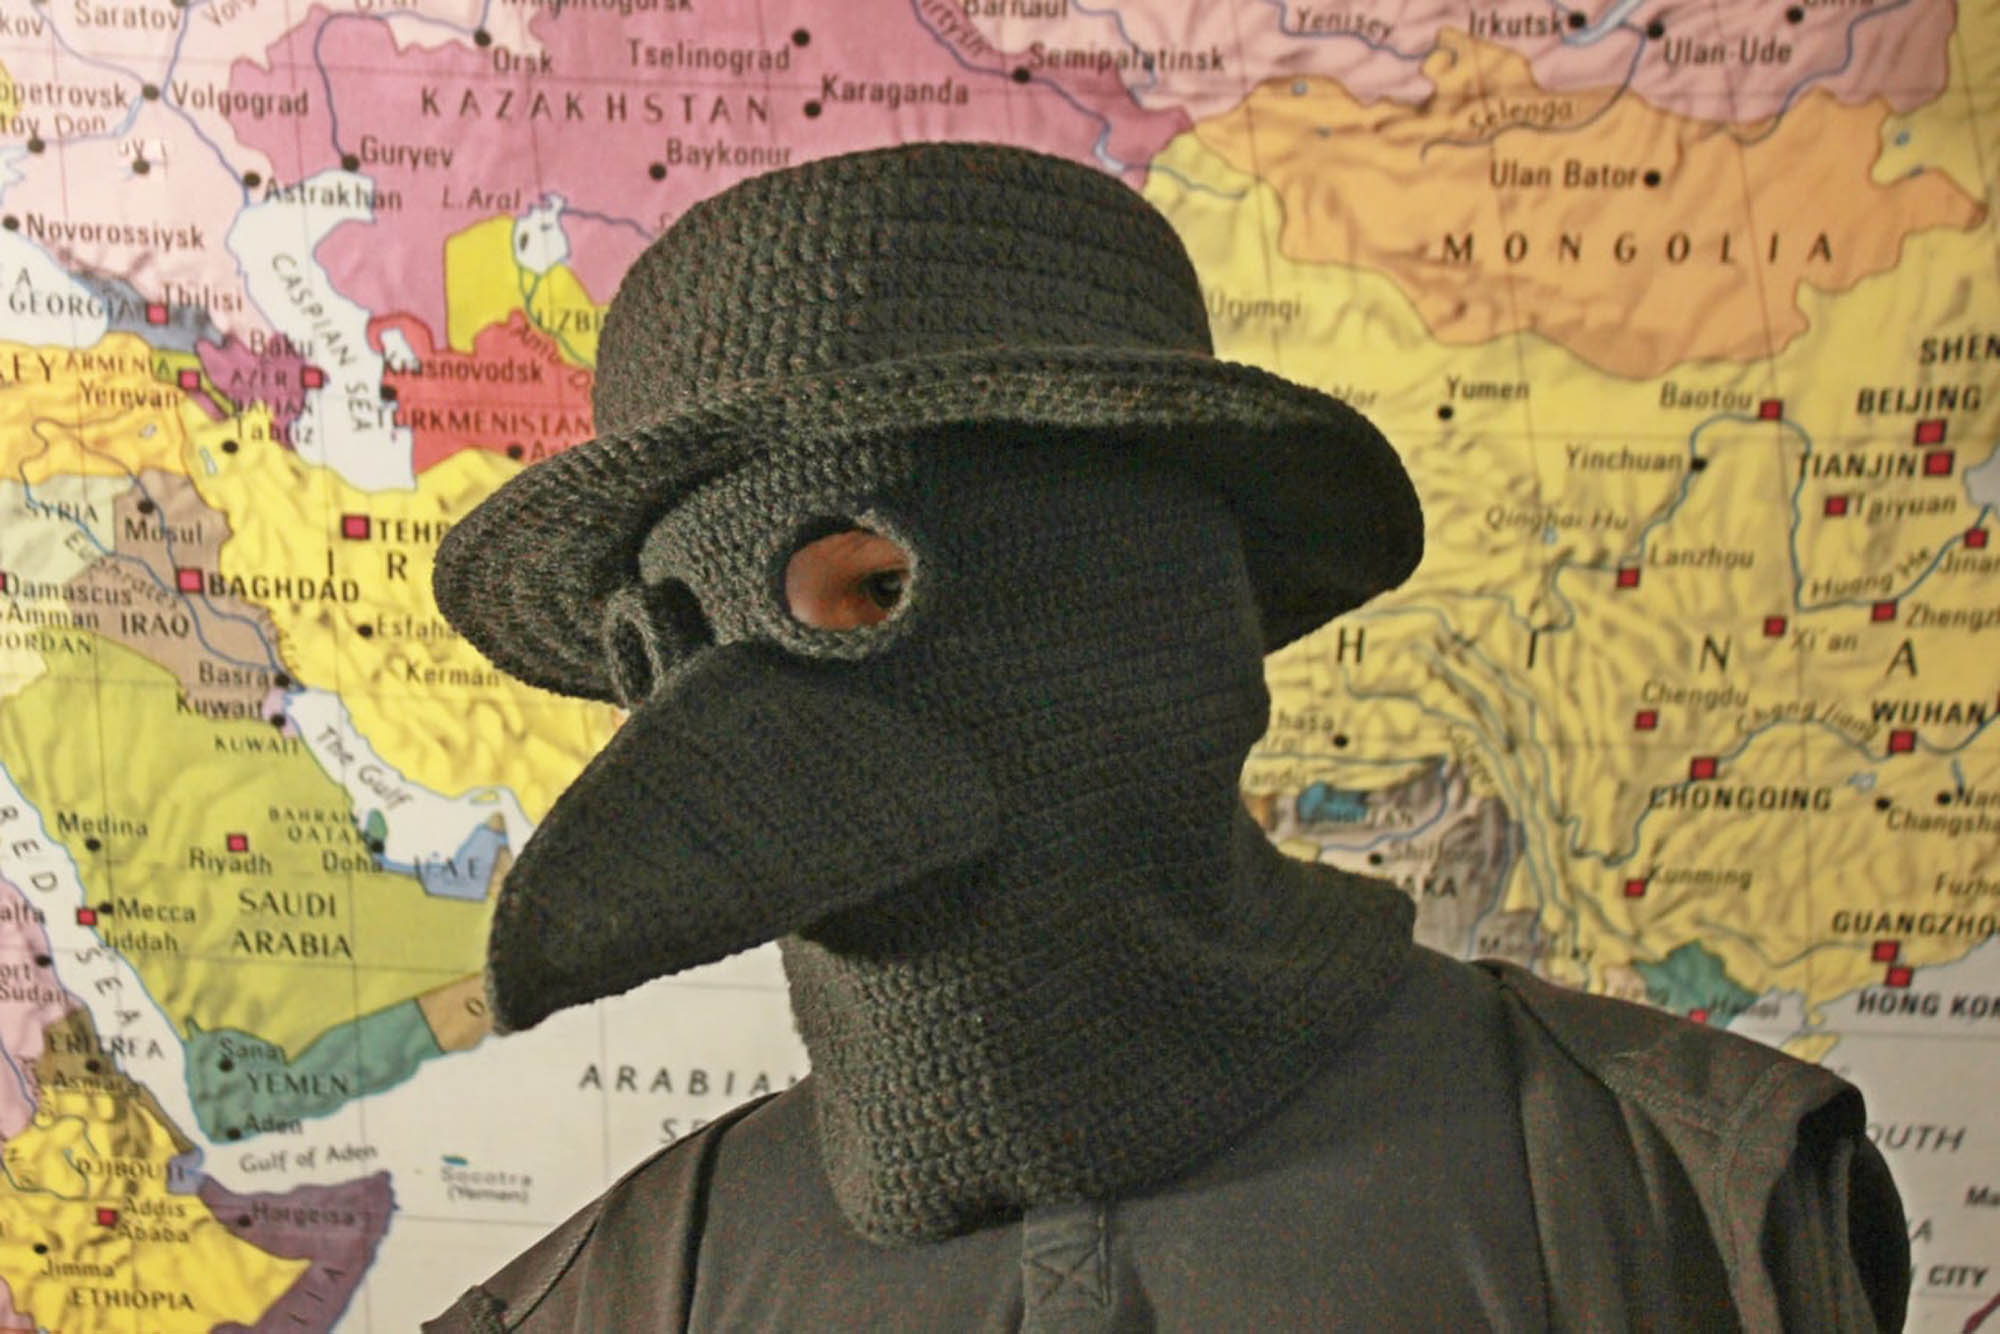 Read more about the article Woman Knits Creepy Plague Doctor Masks Amid Shortage